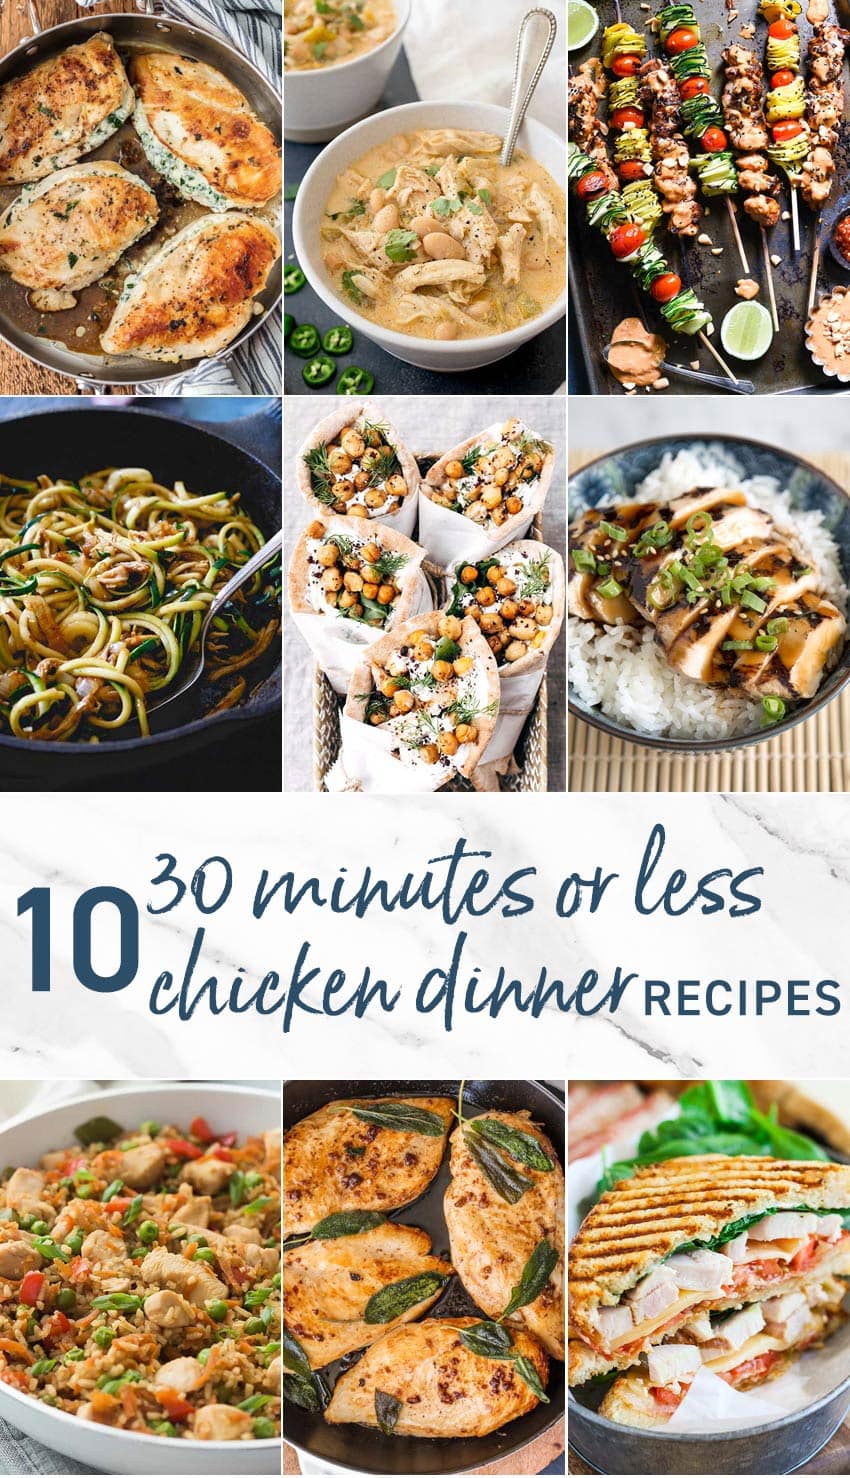 30 Minutes or Less Chicken Dinner Recipes